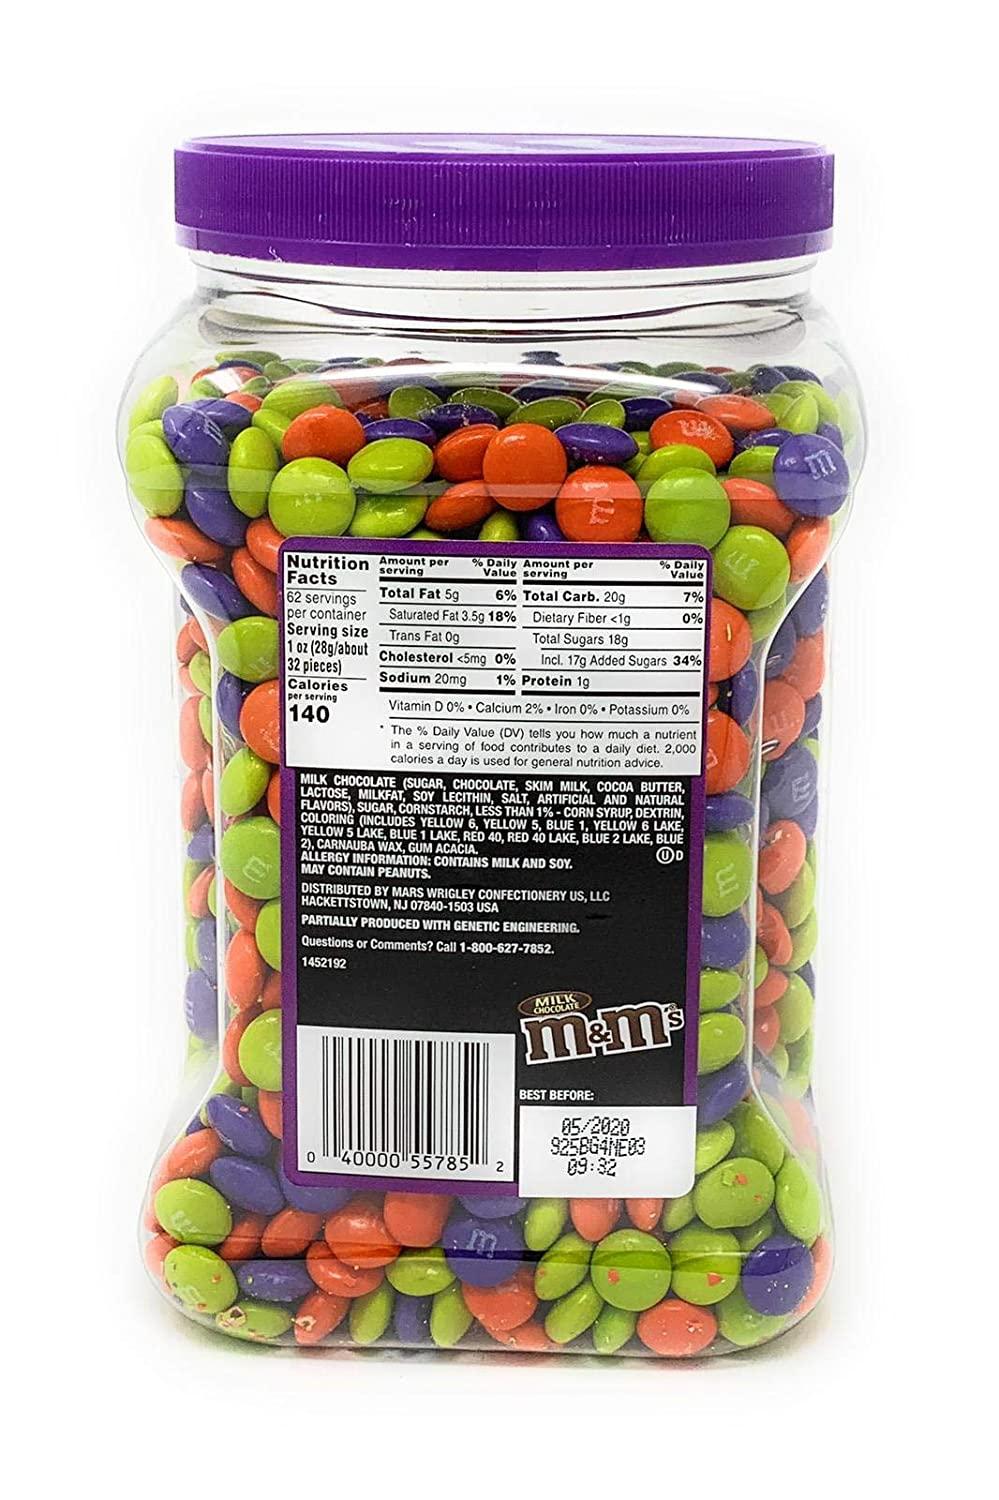 M&M's Ghoul's Mix Milk Chocolate Halloween Candy Bag, 11.4 oz - Mariano's